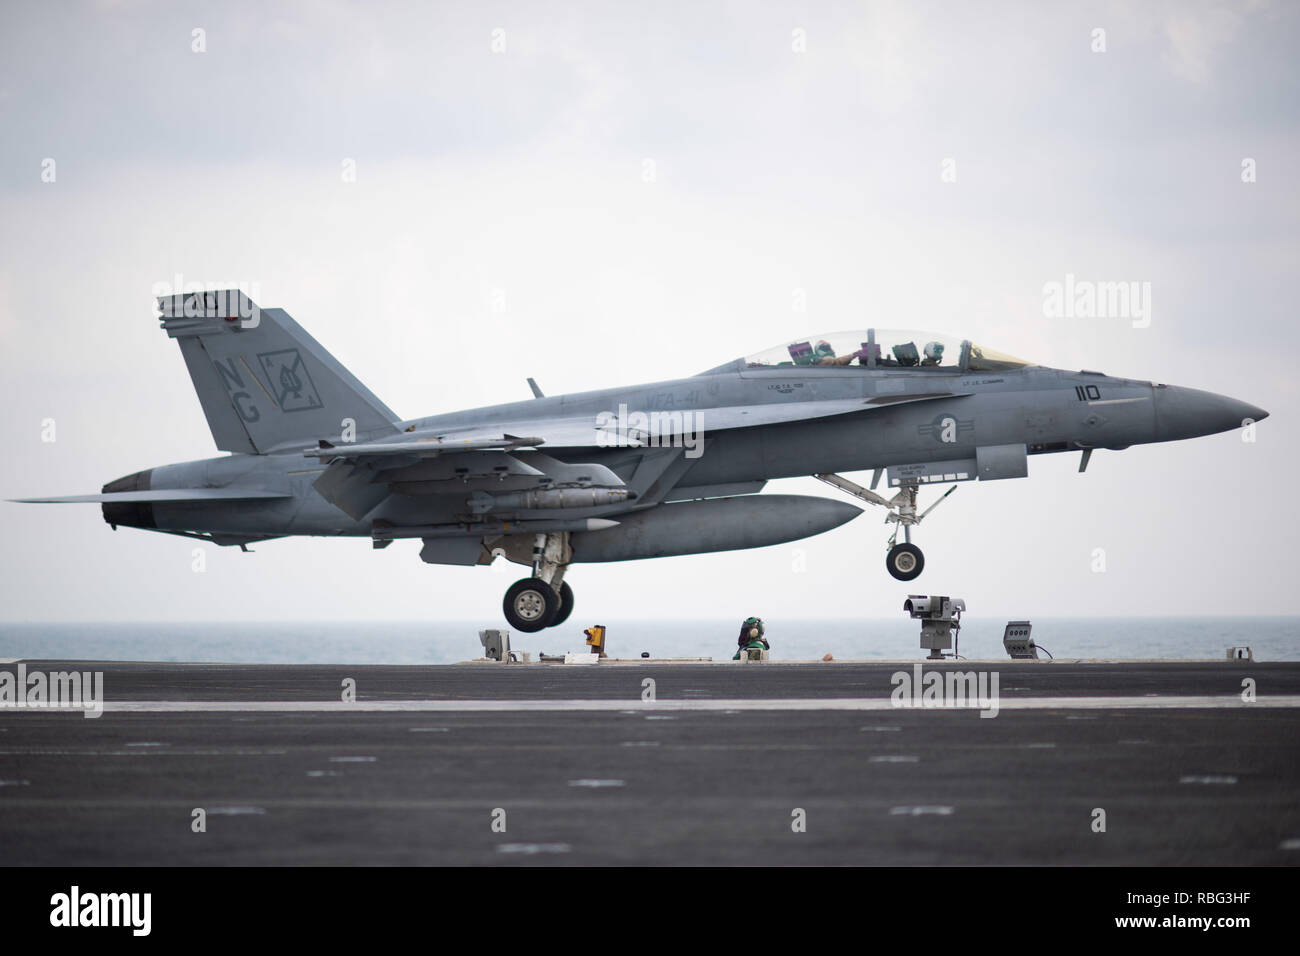 An F/A-18F Super Hornet, assigned to Strike Fighter Squadron (VFA) 41, launches from the flight deck of the aircraft carrier USS John C. Stennis (CVN 74) in the Arabian Gulf, Jan. 7, 2019. The John C. Stennis Carrier Strike Group is deployed to the U.S. 5th Fleet area of operations in support of naval operations to ensure maritime stability and security in the Central Region, connecting the Mediterranean and the Pacific through the western Indian Ocean and three strategic choke points. (U.S. Navy photo by Mass Communication Specialist 3rd Class Grant G. Grady) Stock Photo